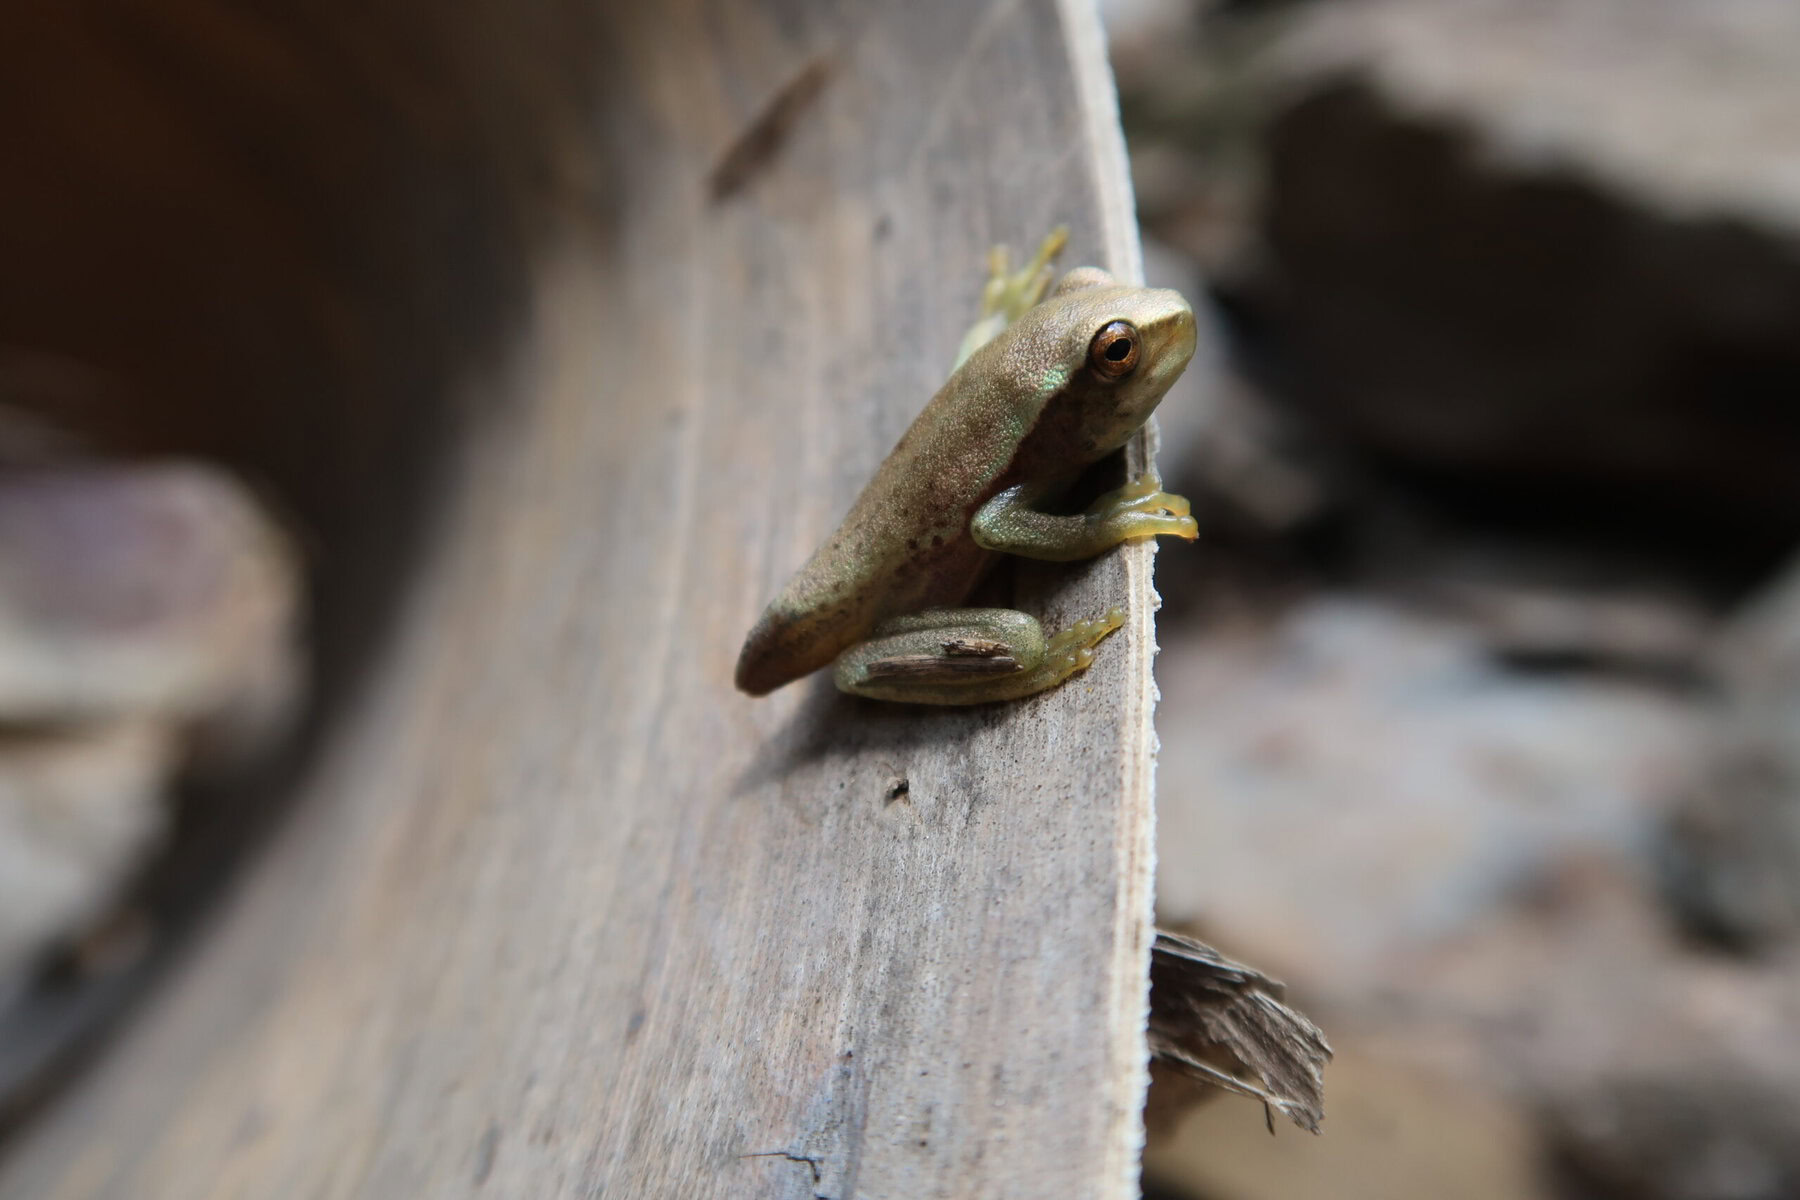 A frog perched on a fence or wall.